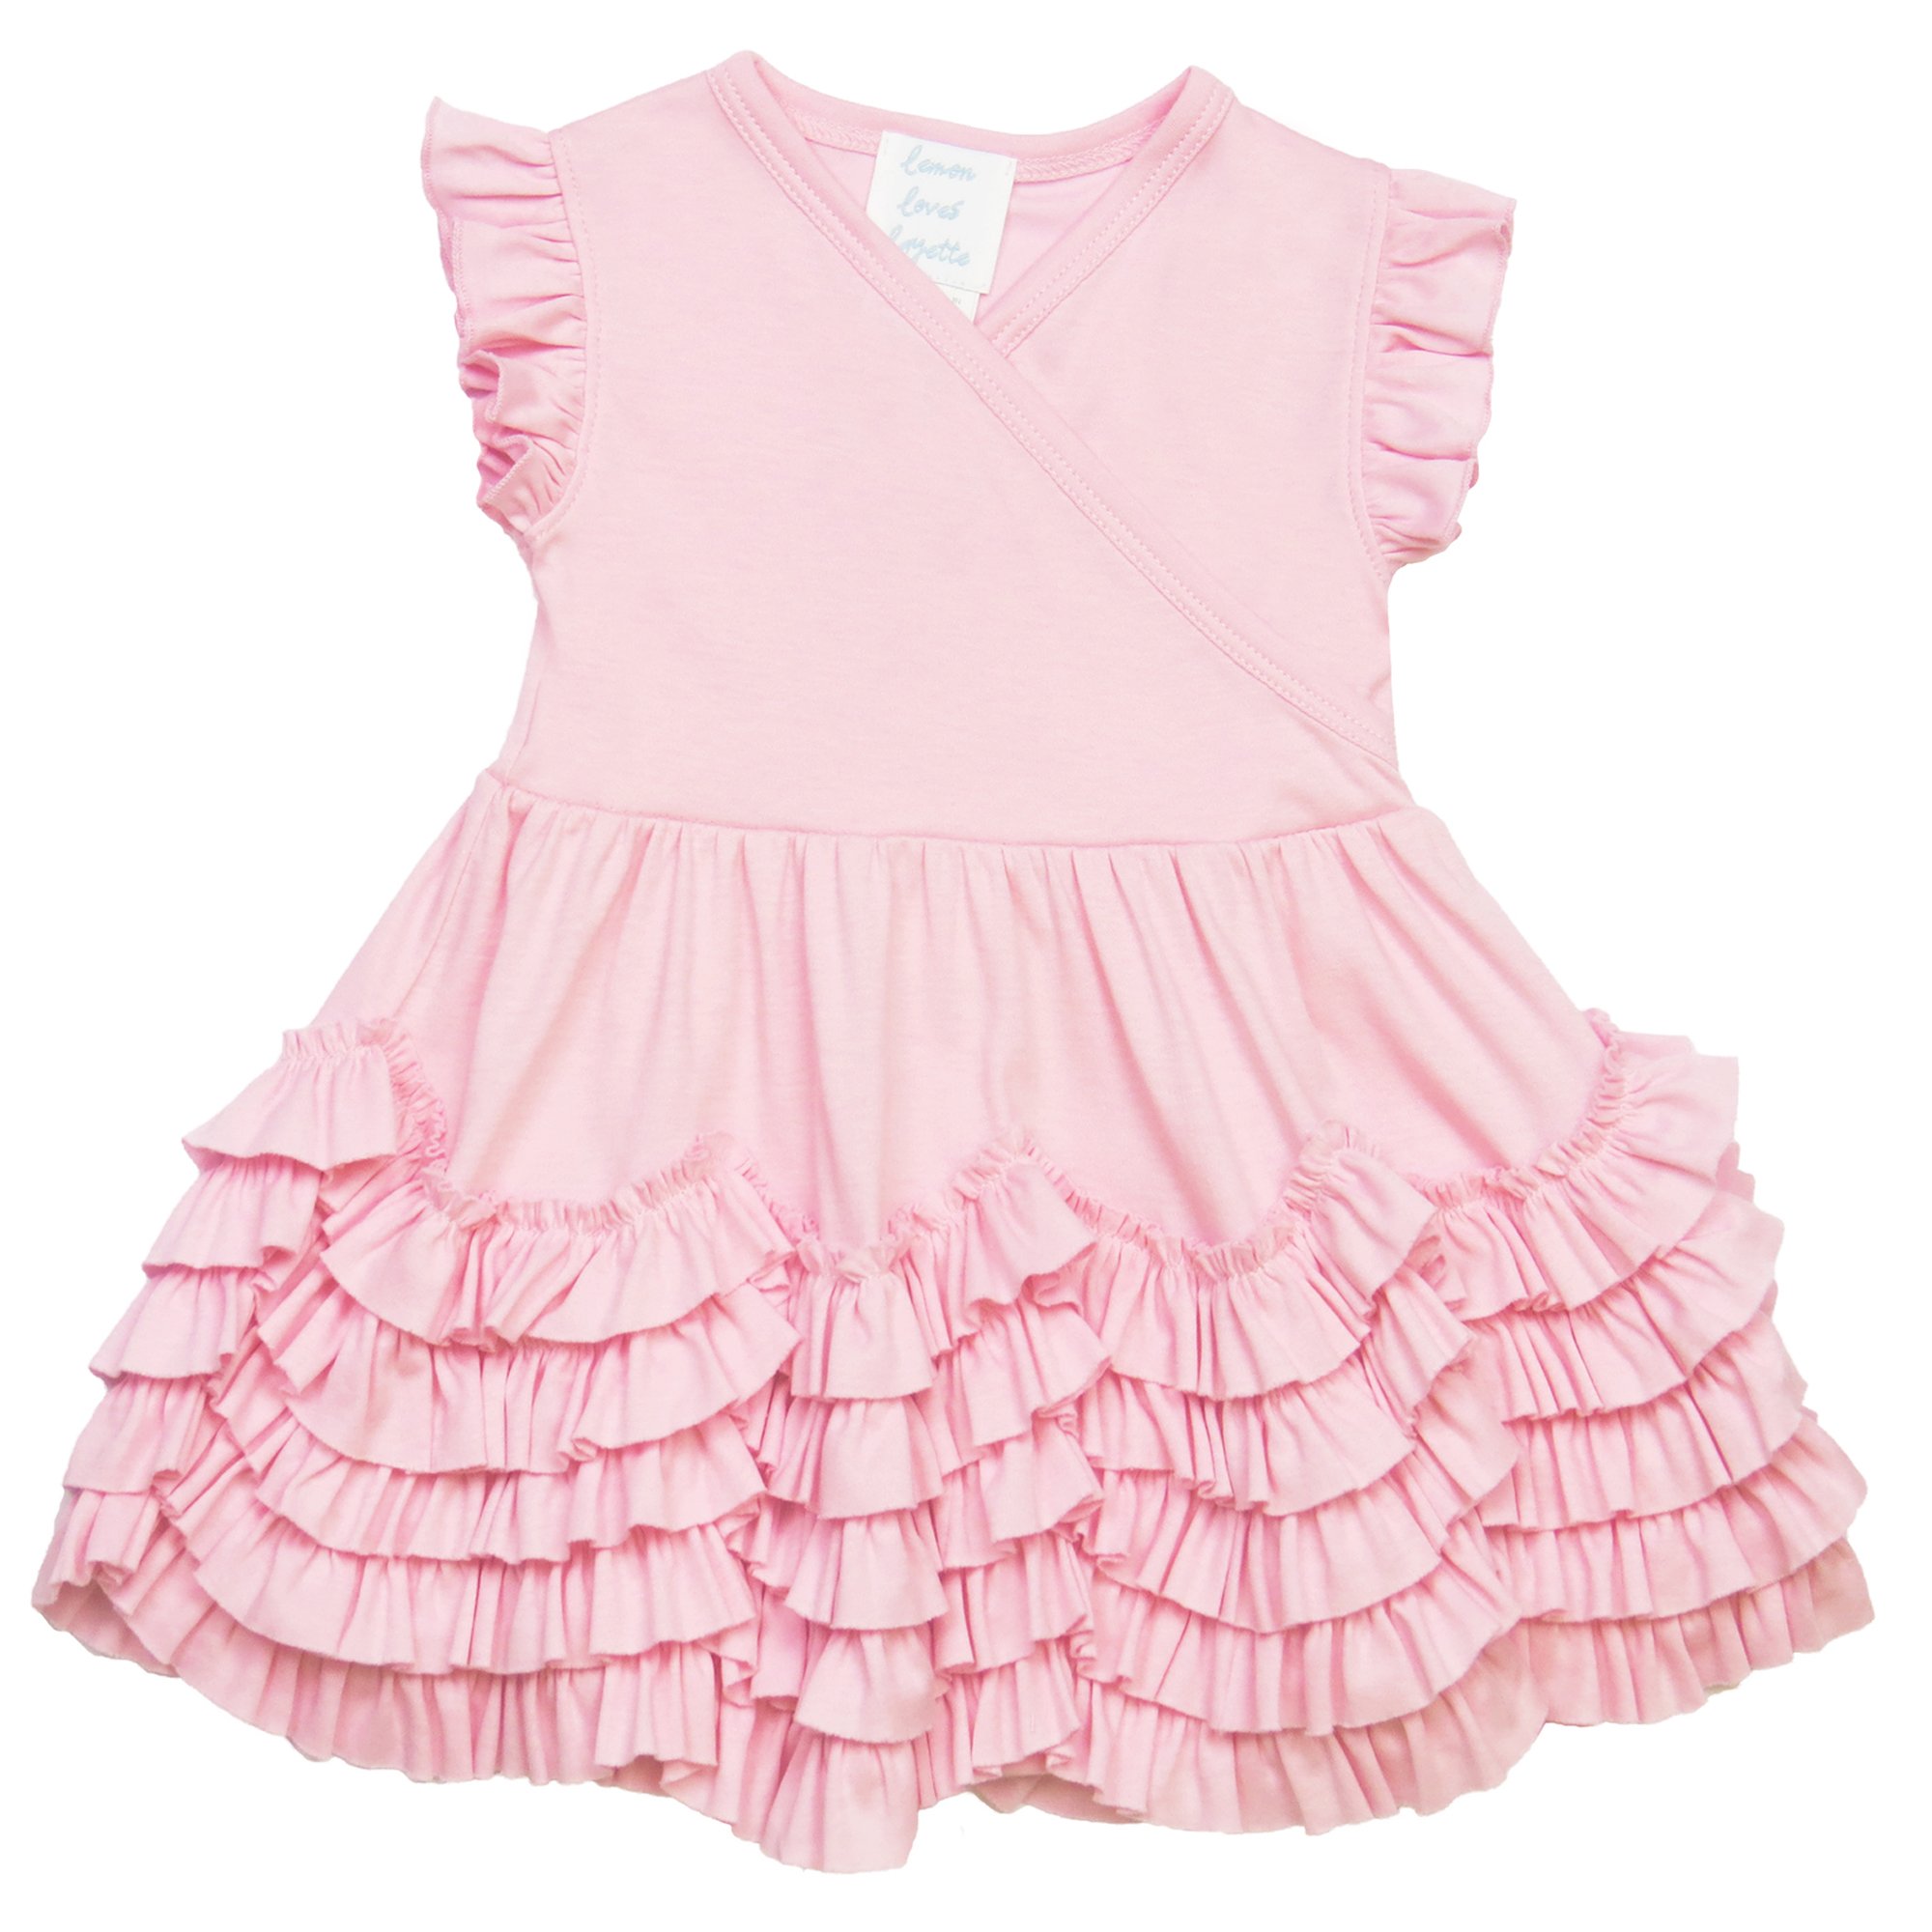 Lemon Loves Layette Mia Dress for Baby and Toddlers in Pink